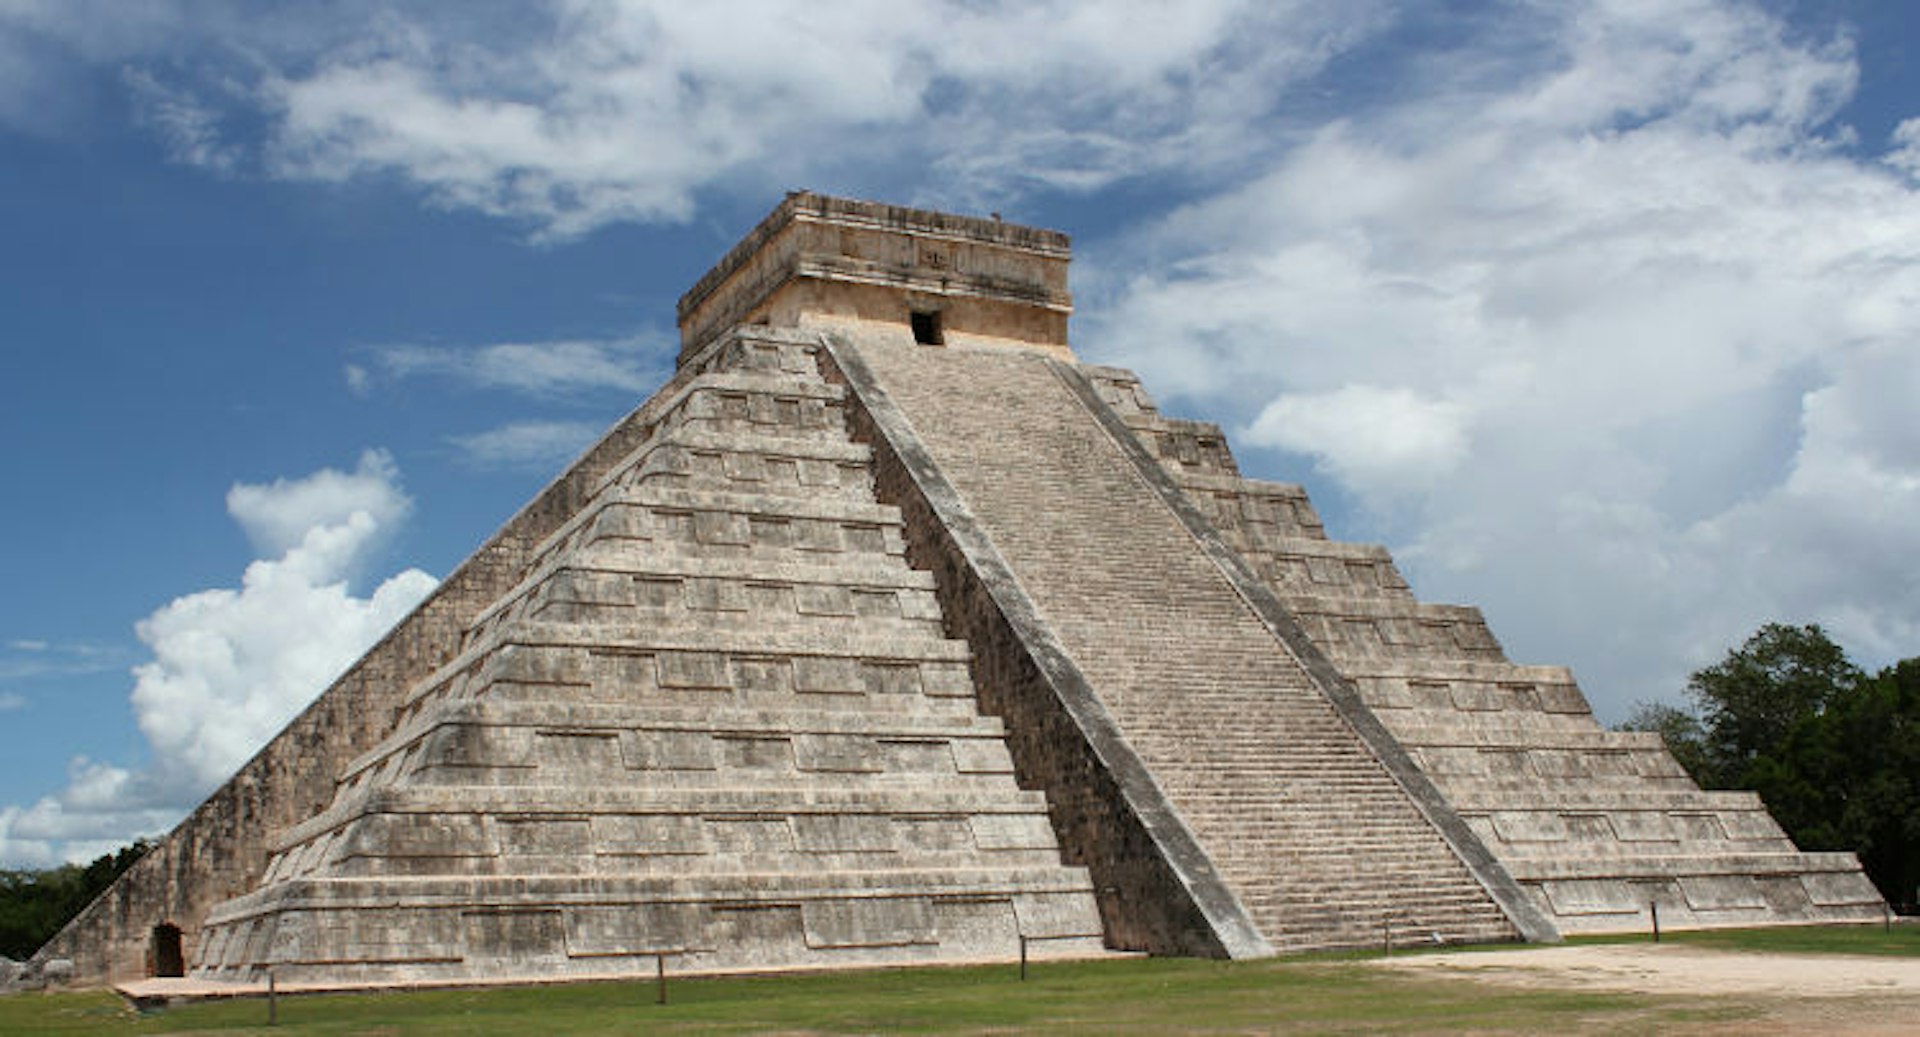 El Castillo (the Castle) is just one of the many impressive sights at Chichen Itza. Image by Arian Zwegers / CC BY 2.0